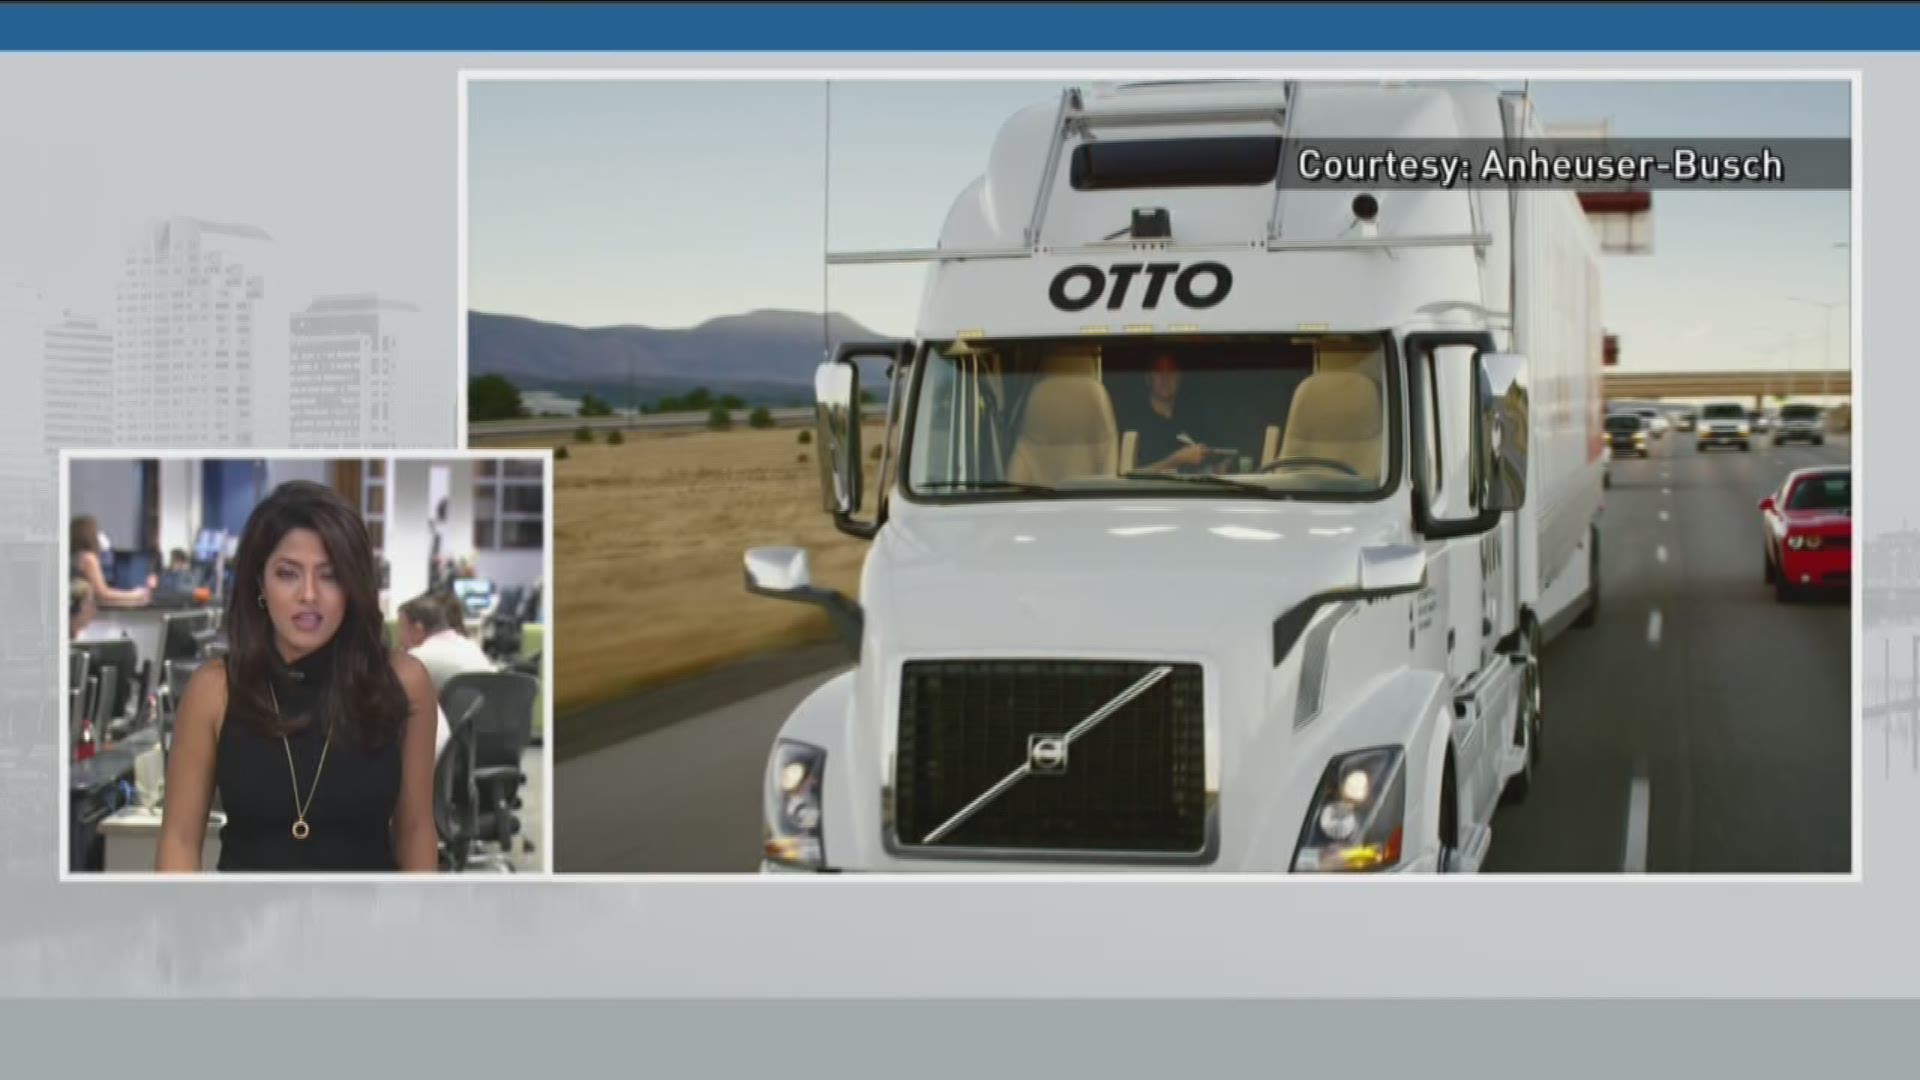 Megan Telles explains more about the world's first shipment by self-driving truck